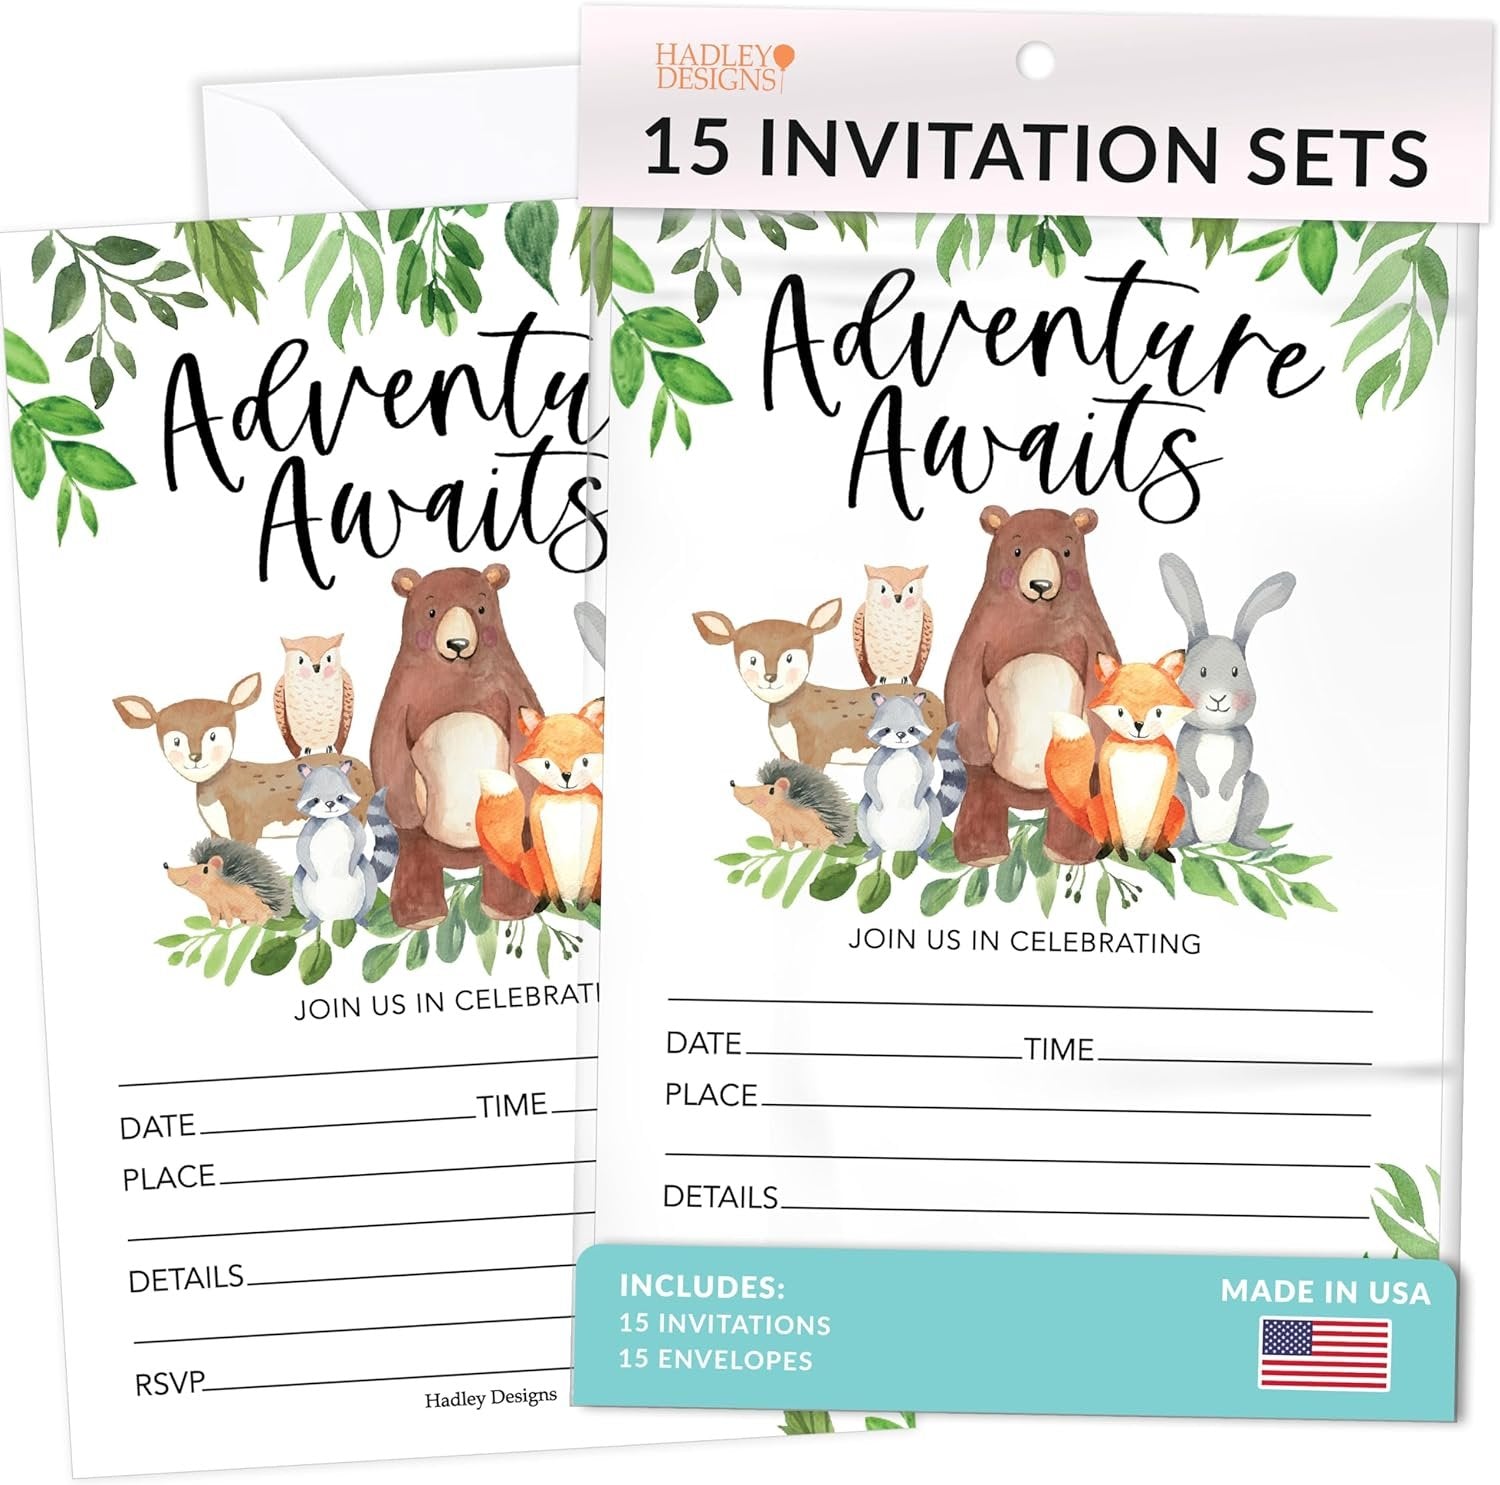 Kids Party Invitations Shop by Theme | Woodland